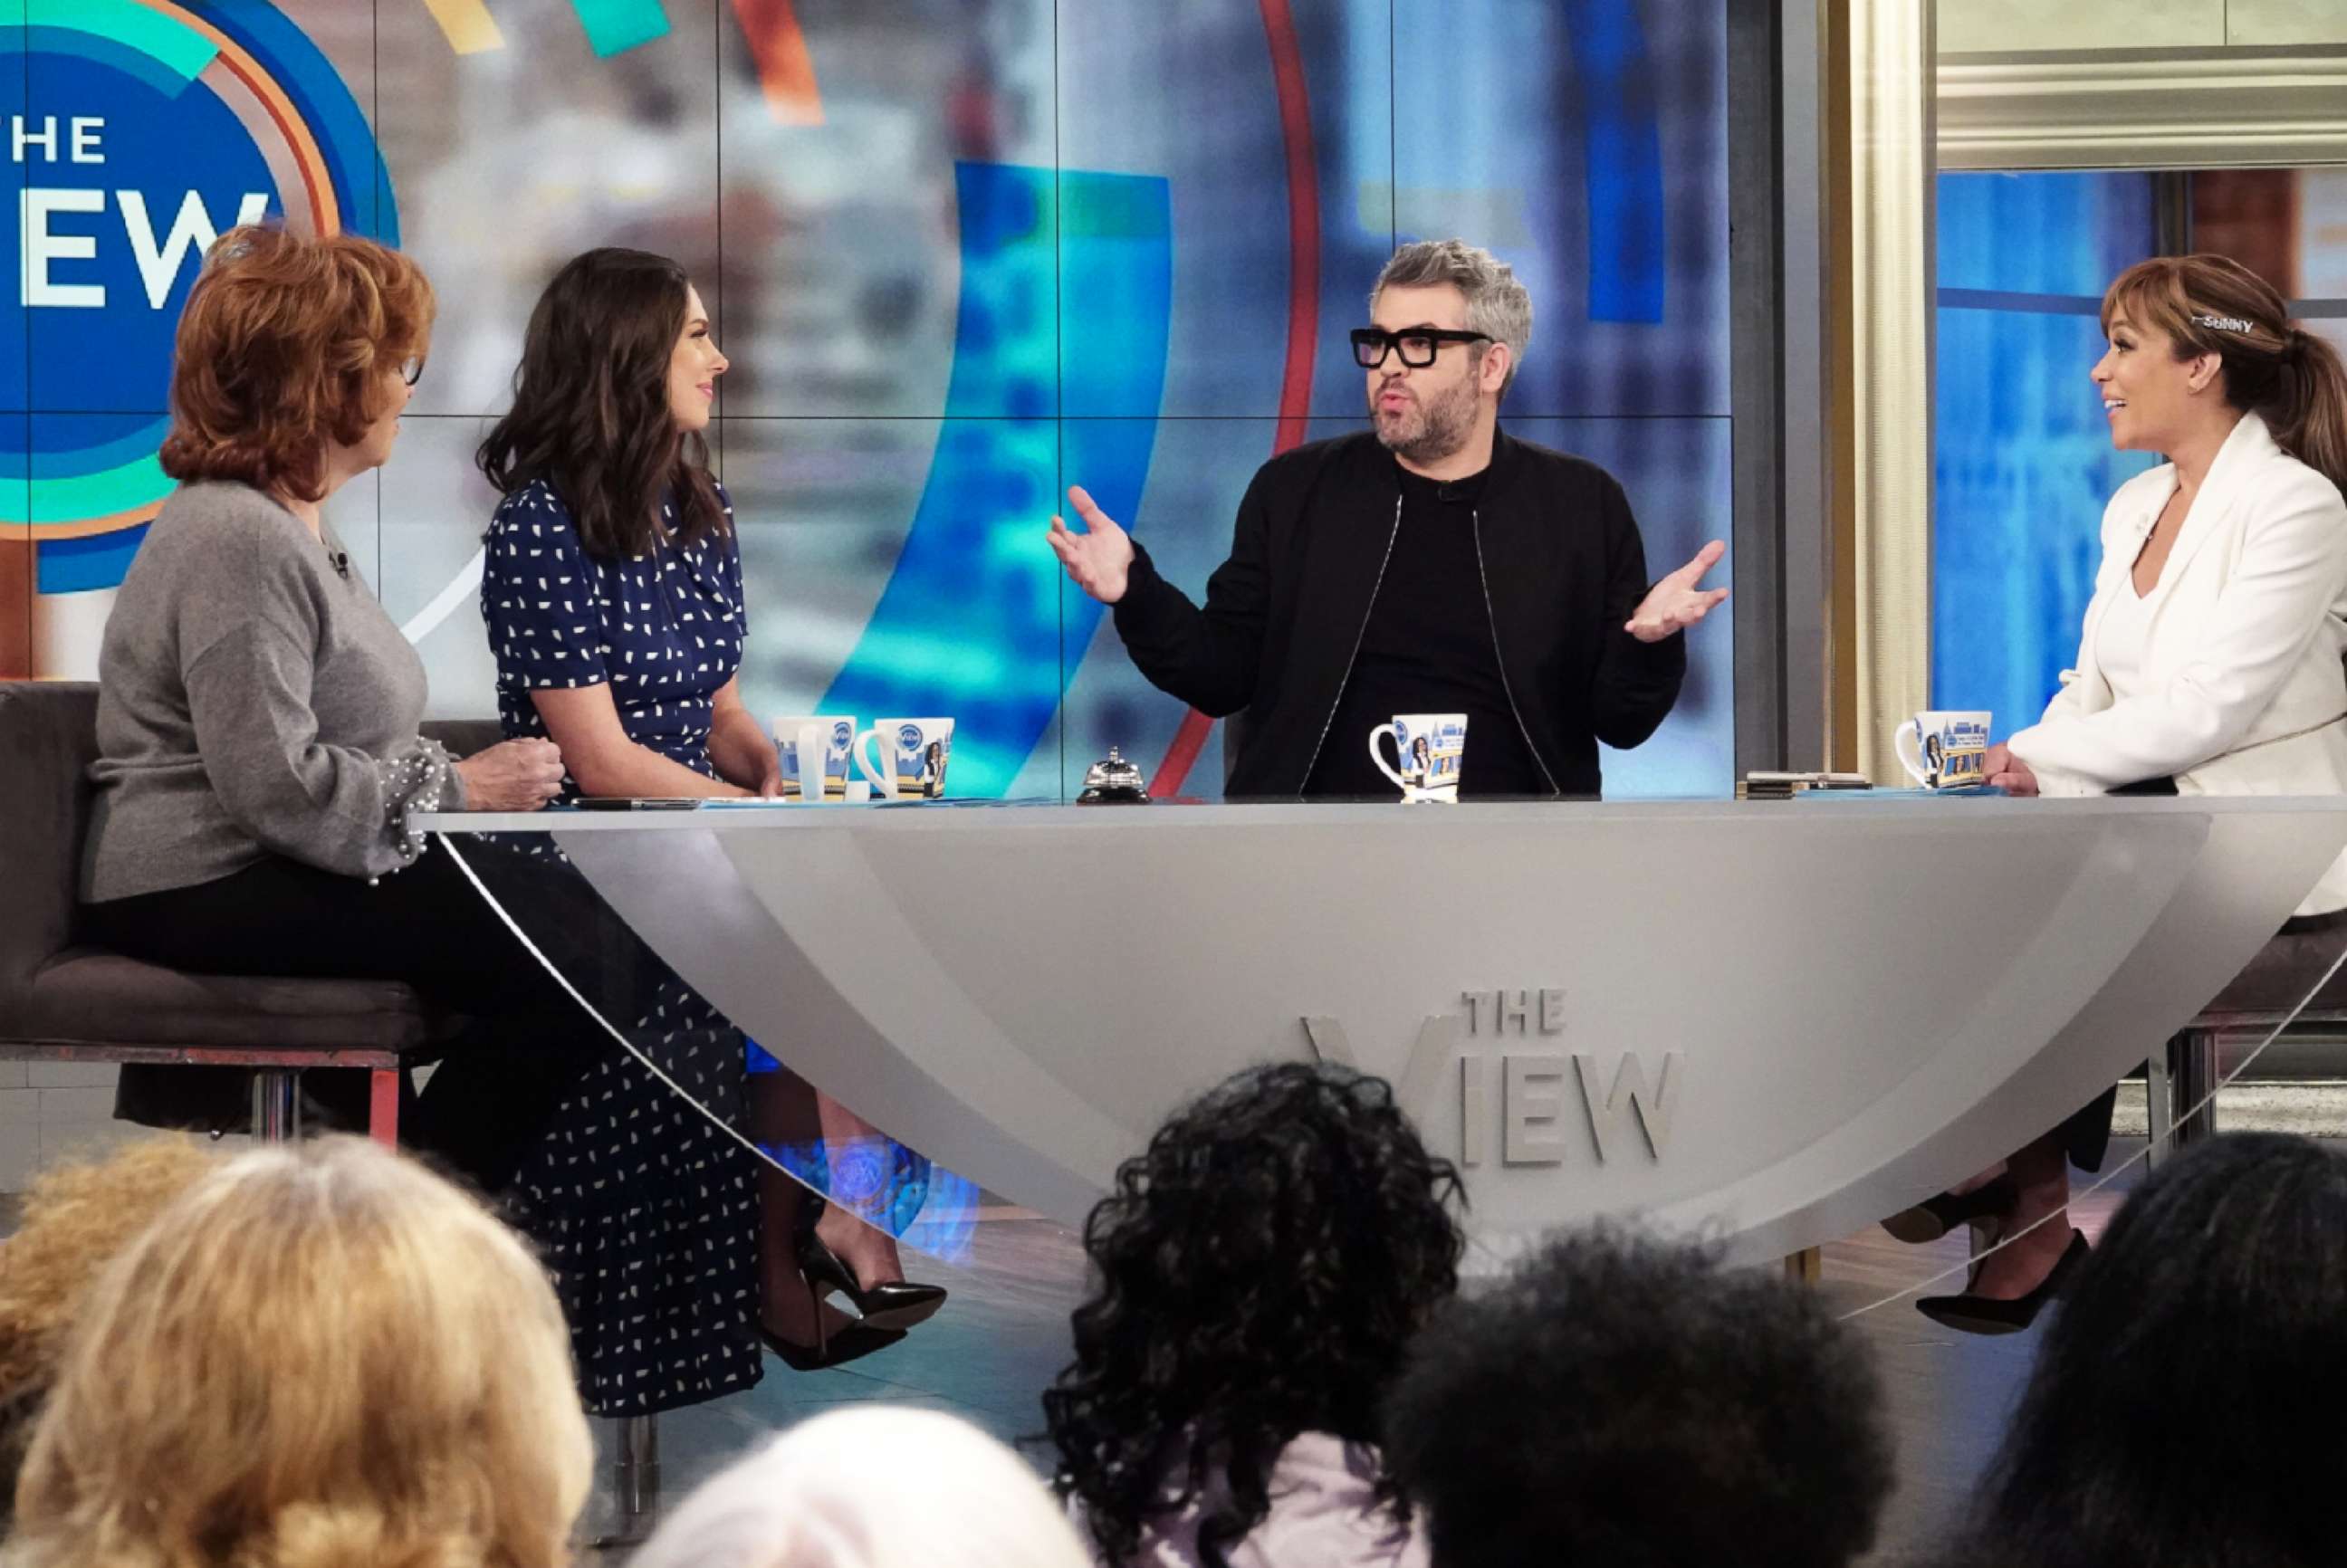 PHOTO: Celebrity stylist Brandon Maxwell, center, discusses his journey into fashion and dishes on the new season of "Project Runway" during his appearance on ABC's "The View", Dec. 5, 2019.